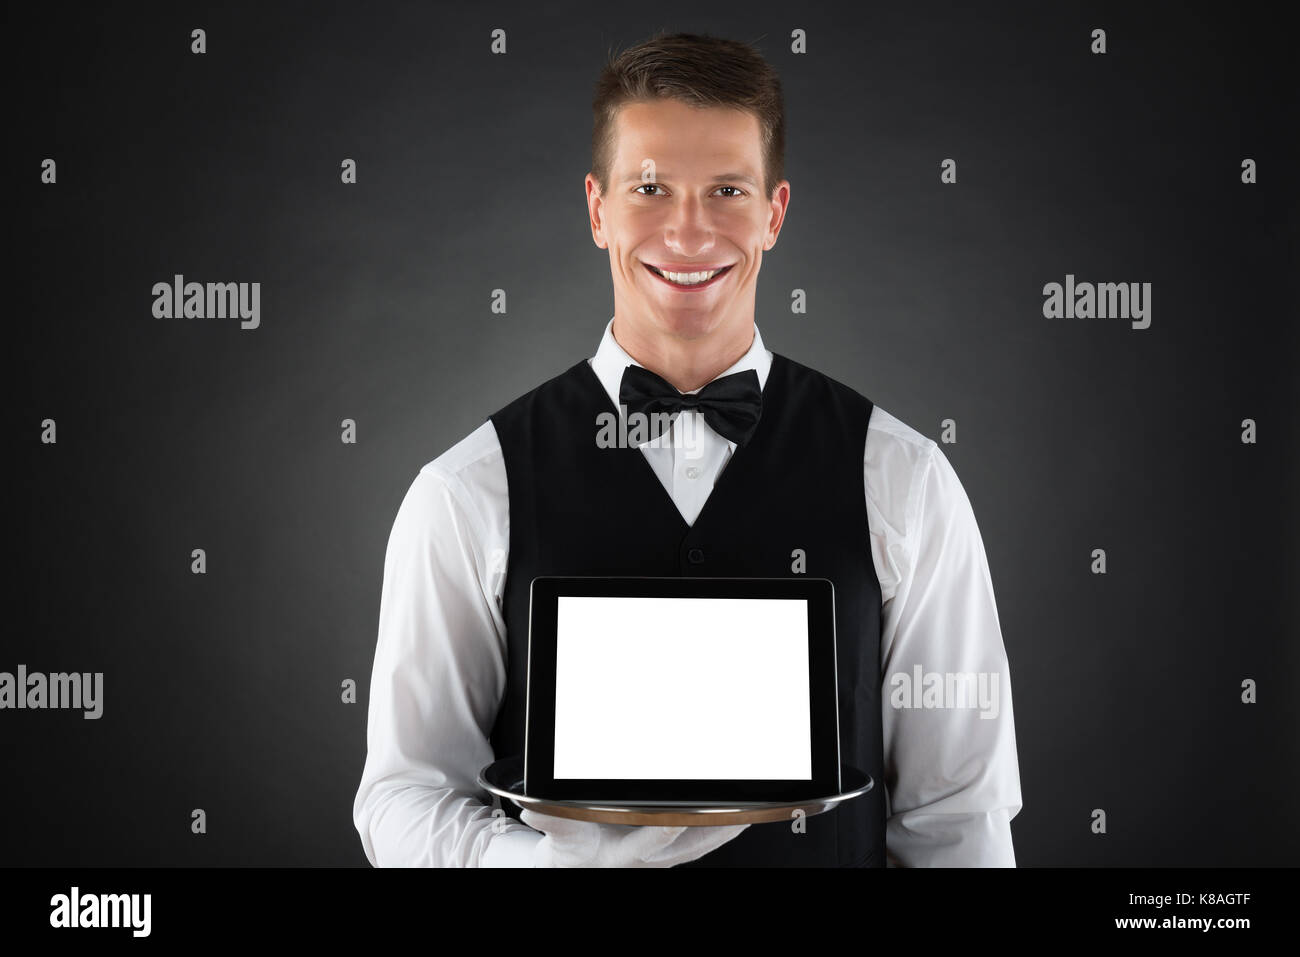 Young Butler Holding Tray With Blank Display Digital Tablet Stock Photo